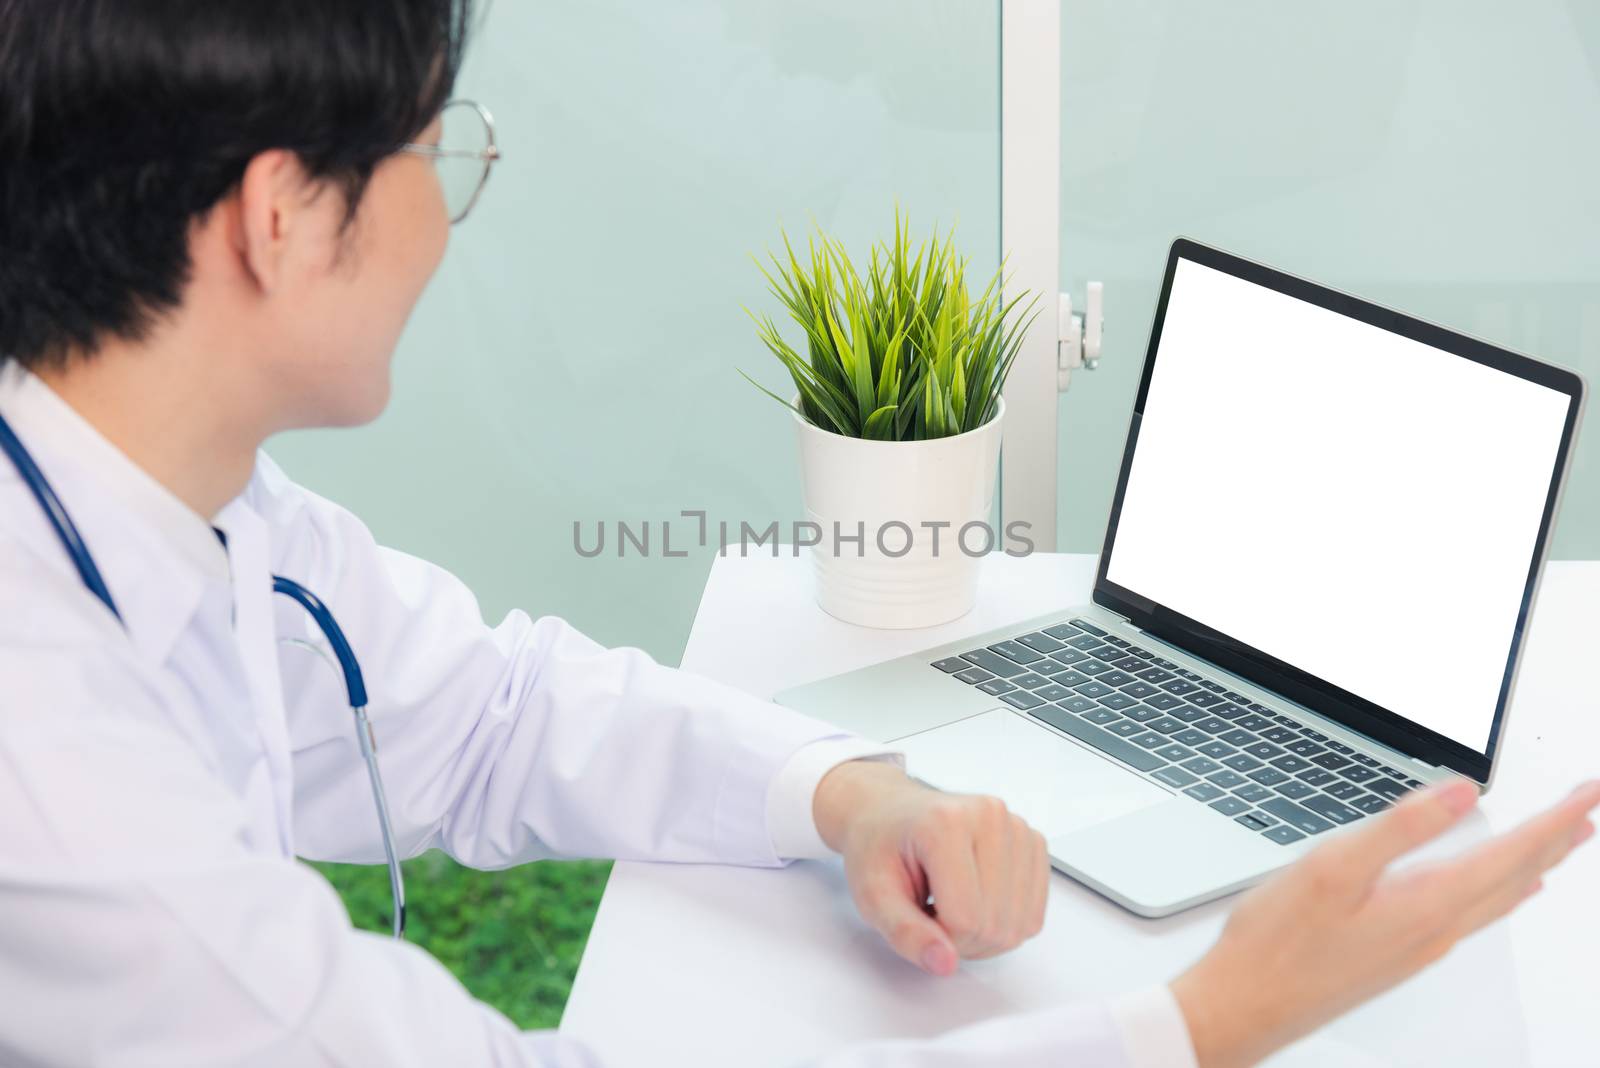 Asian young handsome doctor man wearing a doctor's dress and stethoscope video conference call or facetime raise hand to explain the symptoms he smiling at hospital office, Health medical care concept